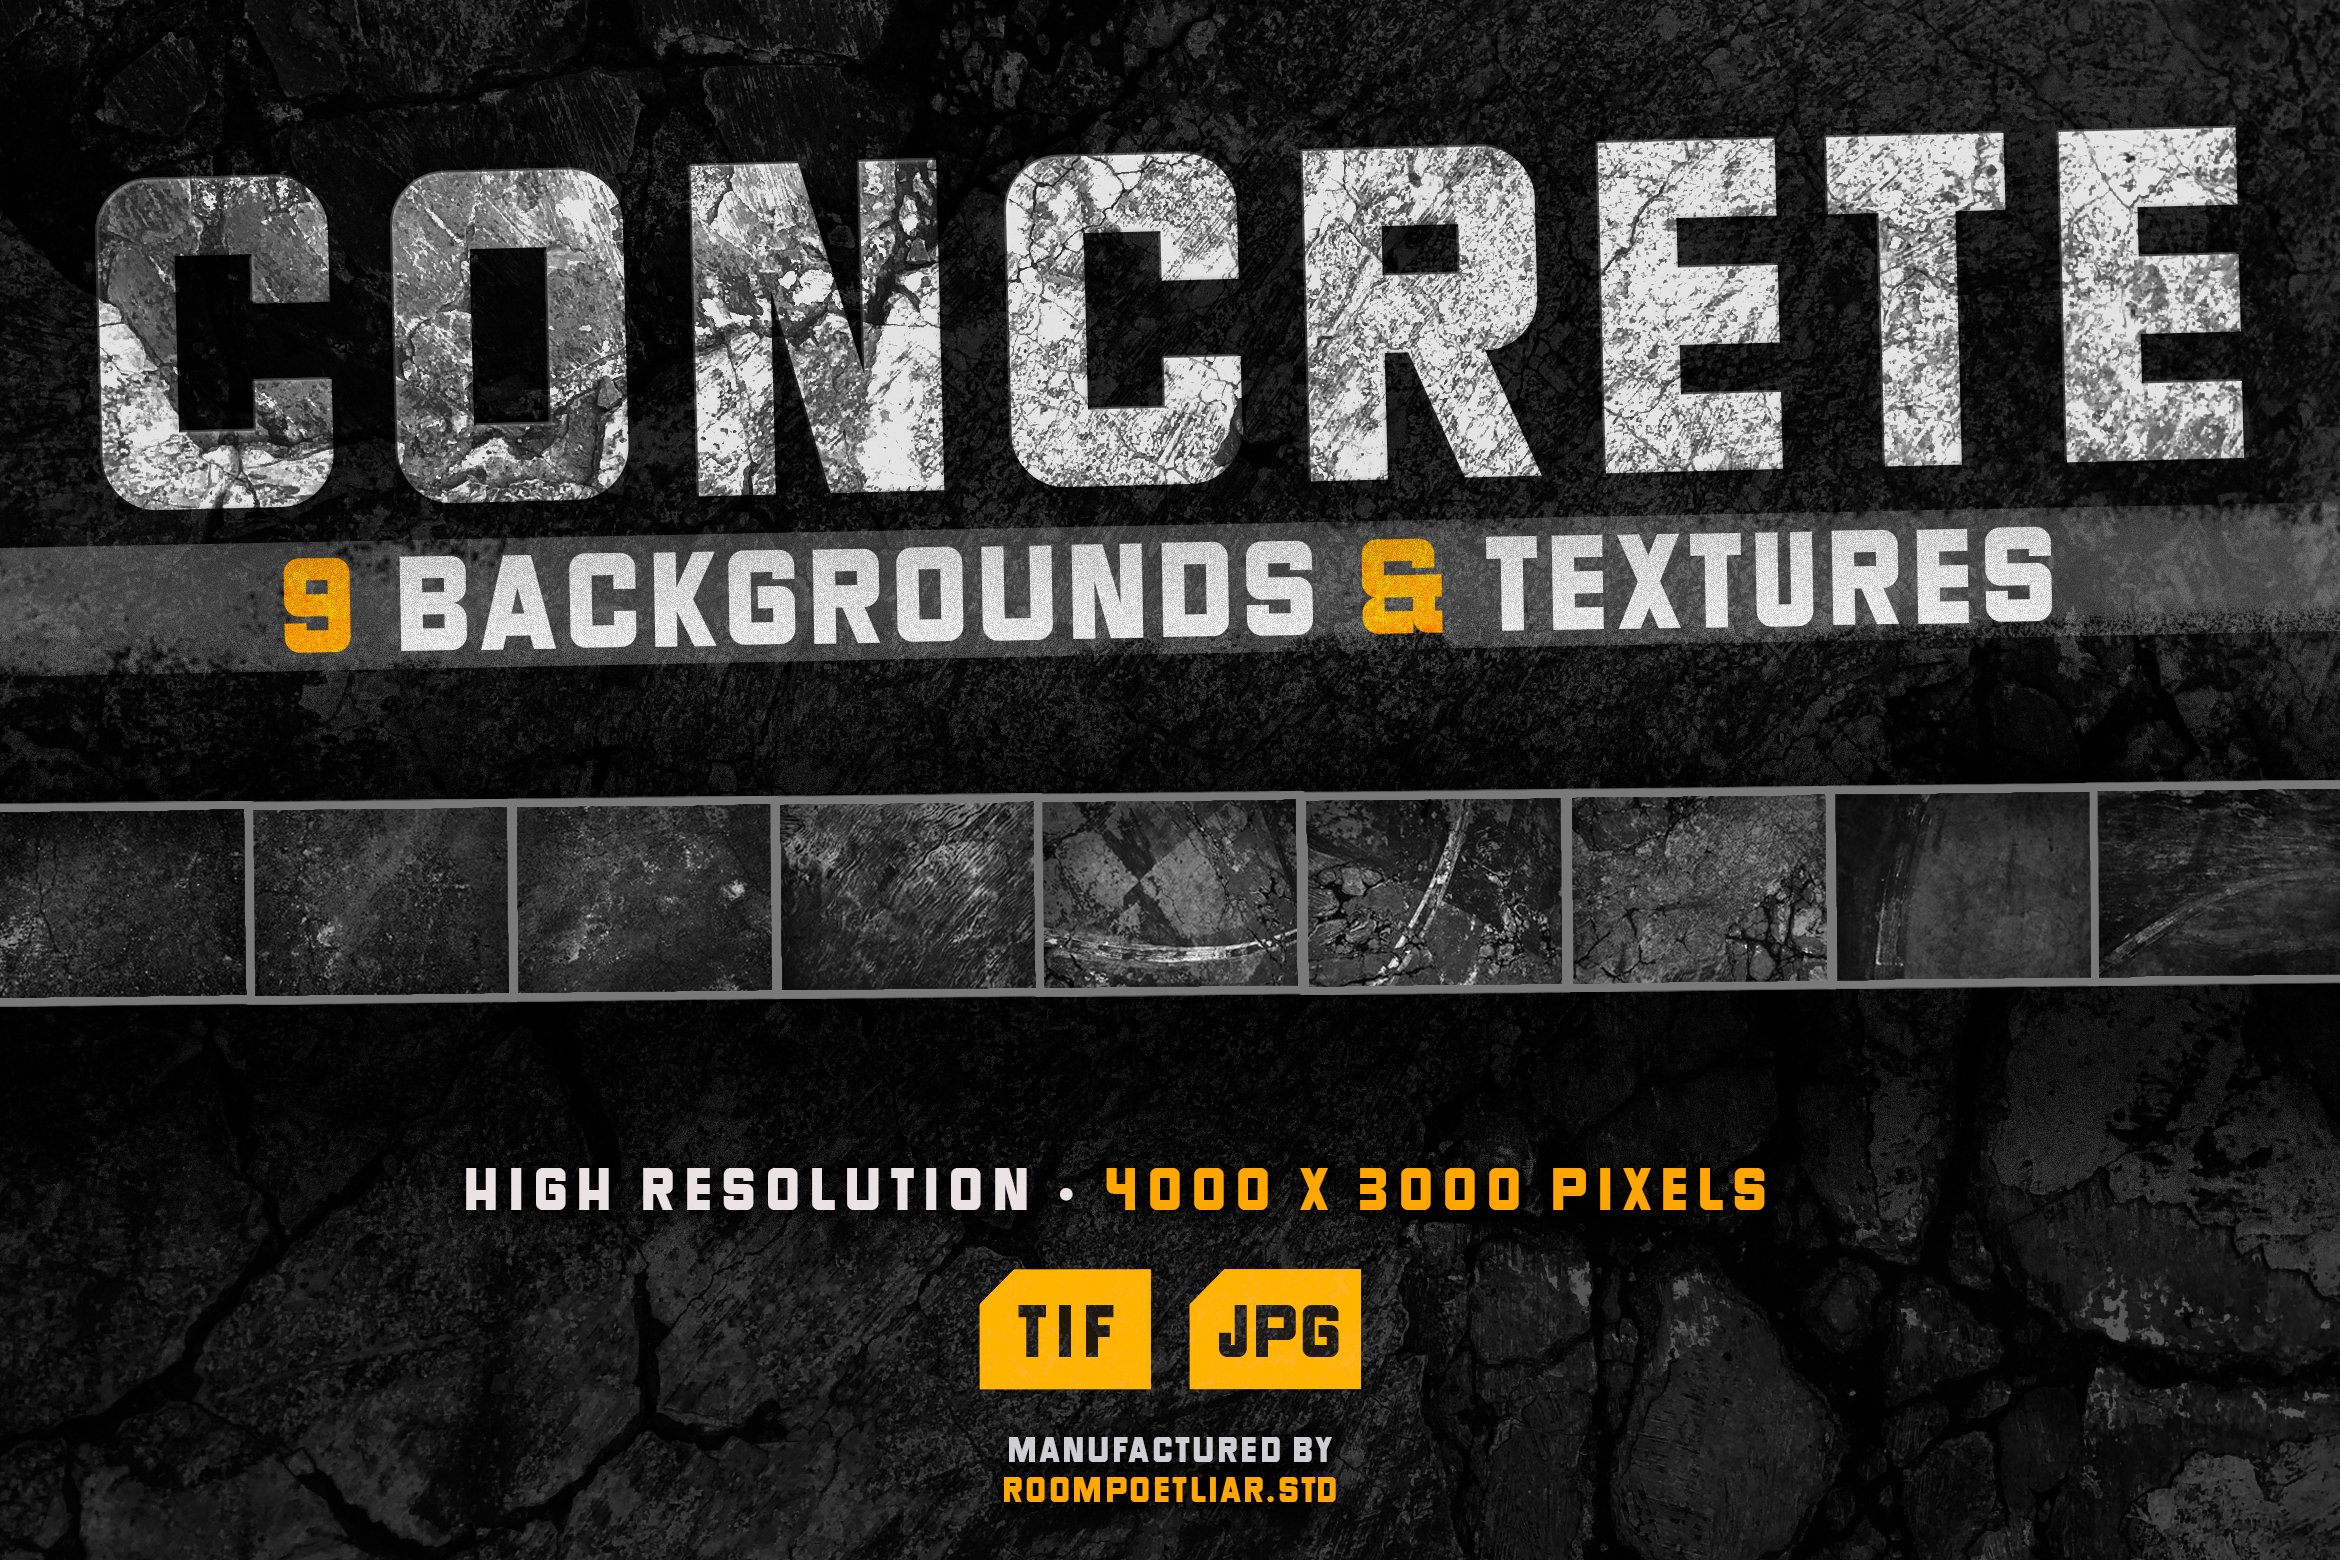 Concrete Wall Textures Background cover image.